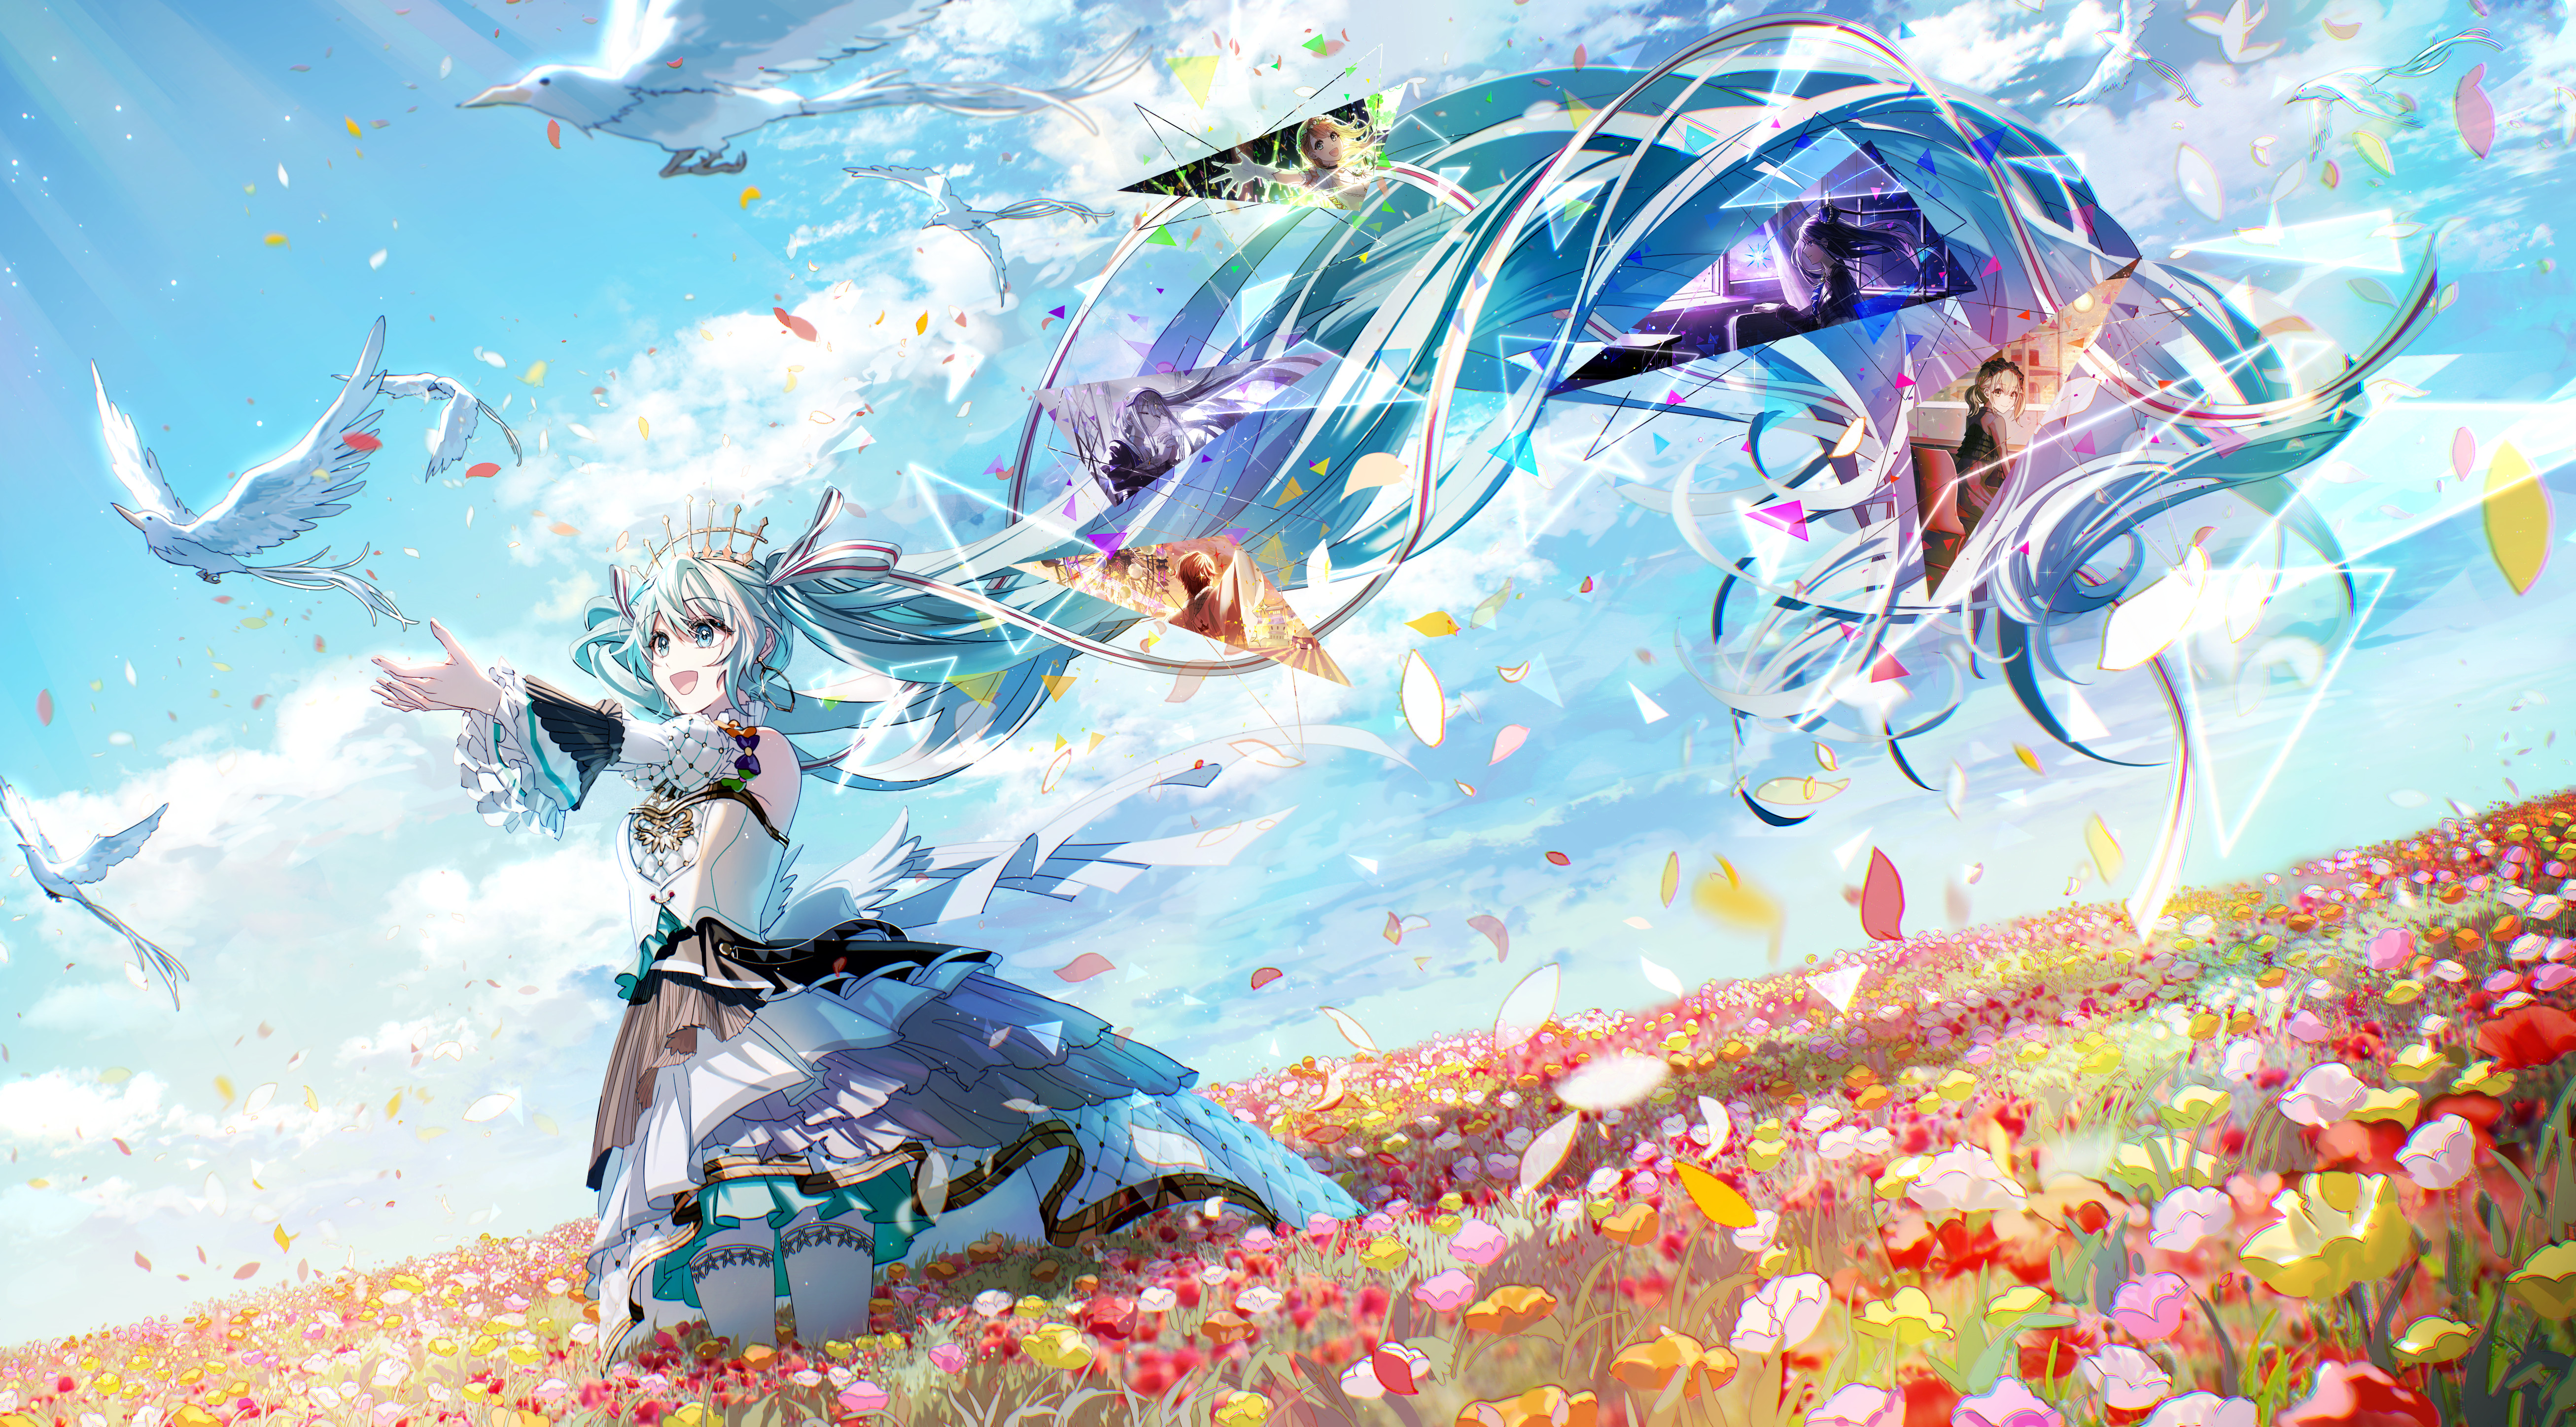 Anime 5226x2894 anime anime girls flowers petals field Vocaloid Hatsune Miku birds long hair sky blue hair blue eyes open mouth animals dress sunlight wind hair blowing in the wind standing leaves arms reaching twintails thigh high socks